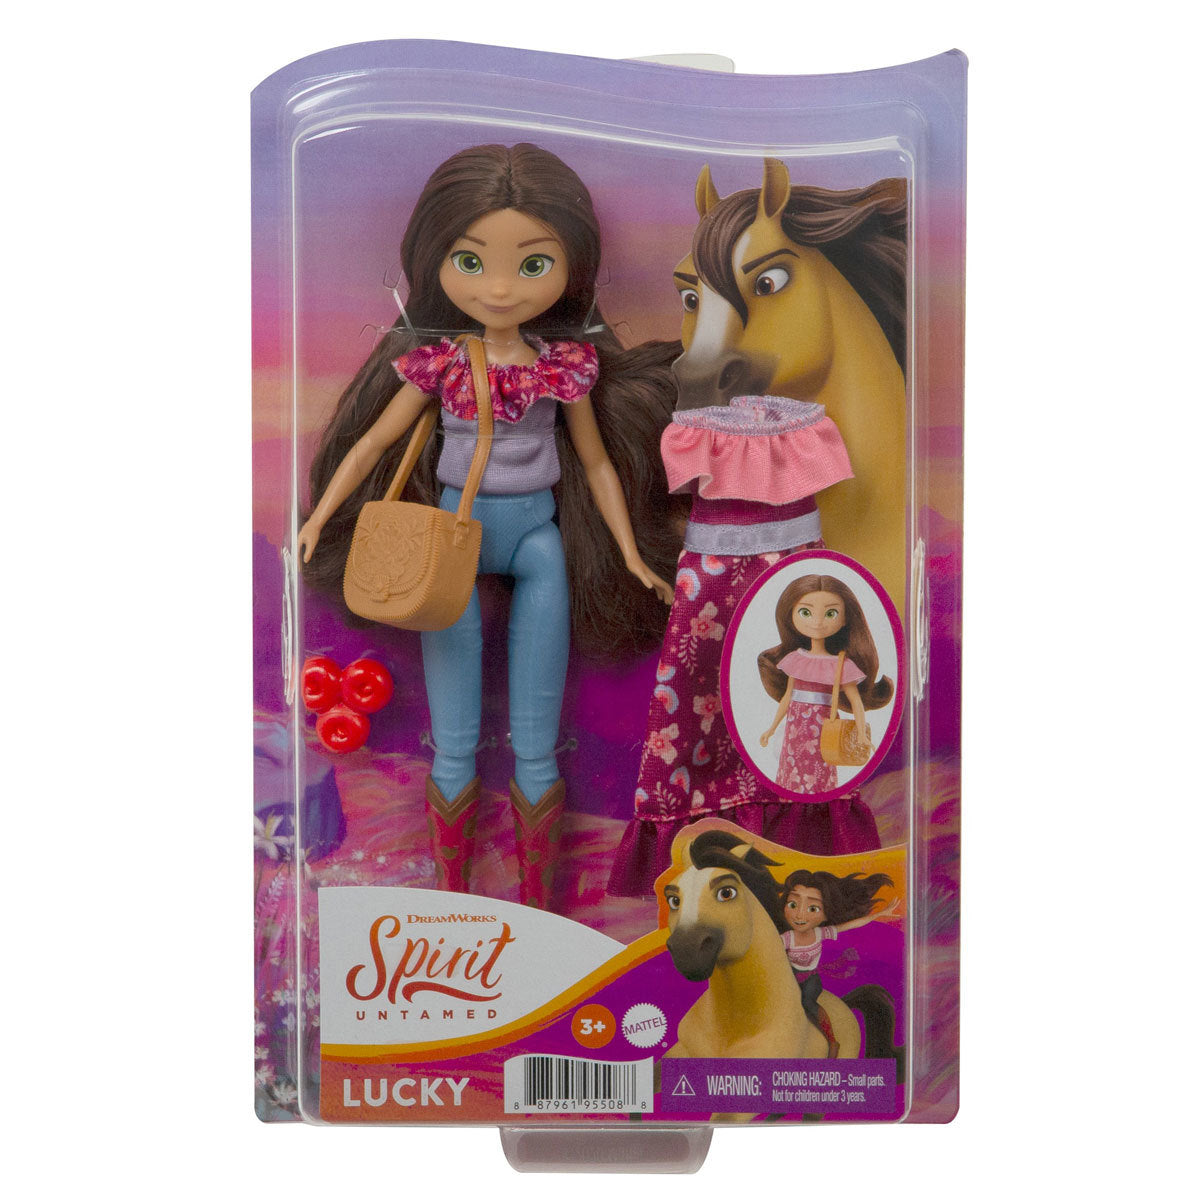 Spirit Untamed Lucky Doll and Fashion Accessory